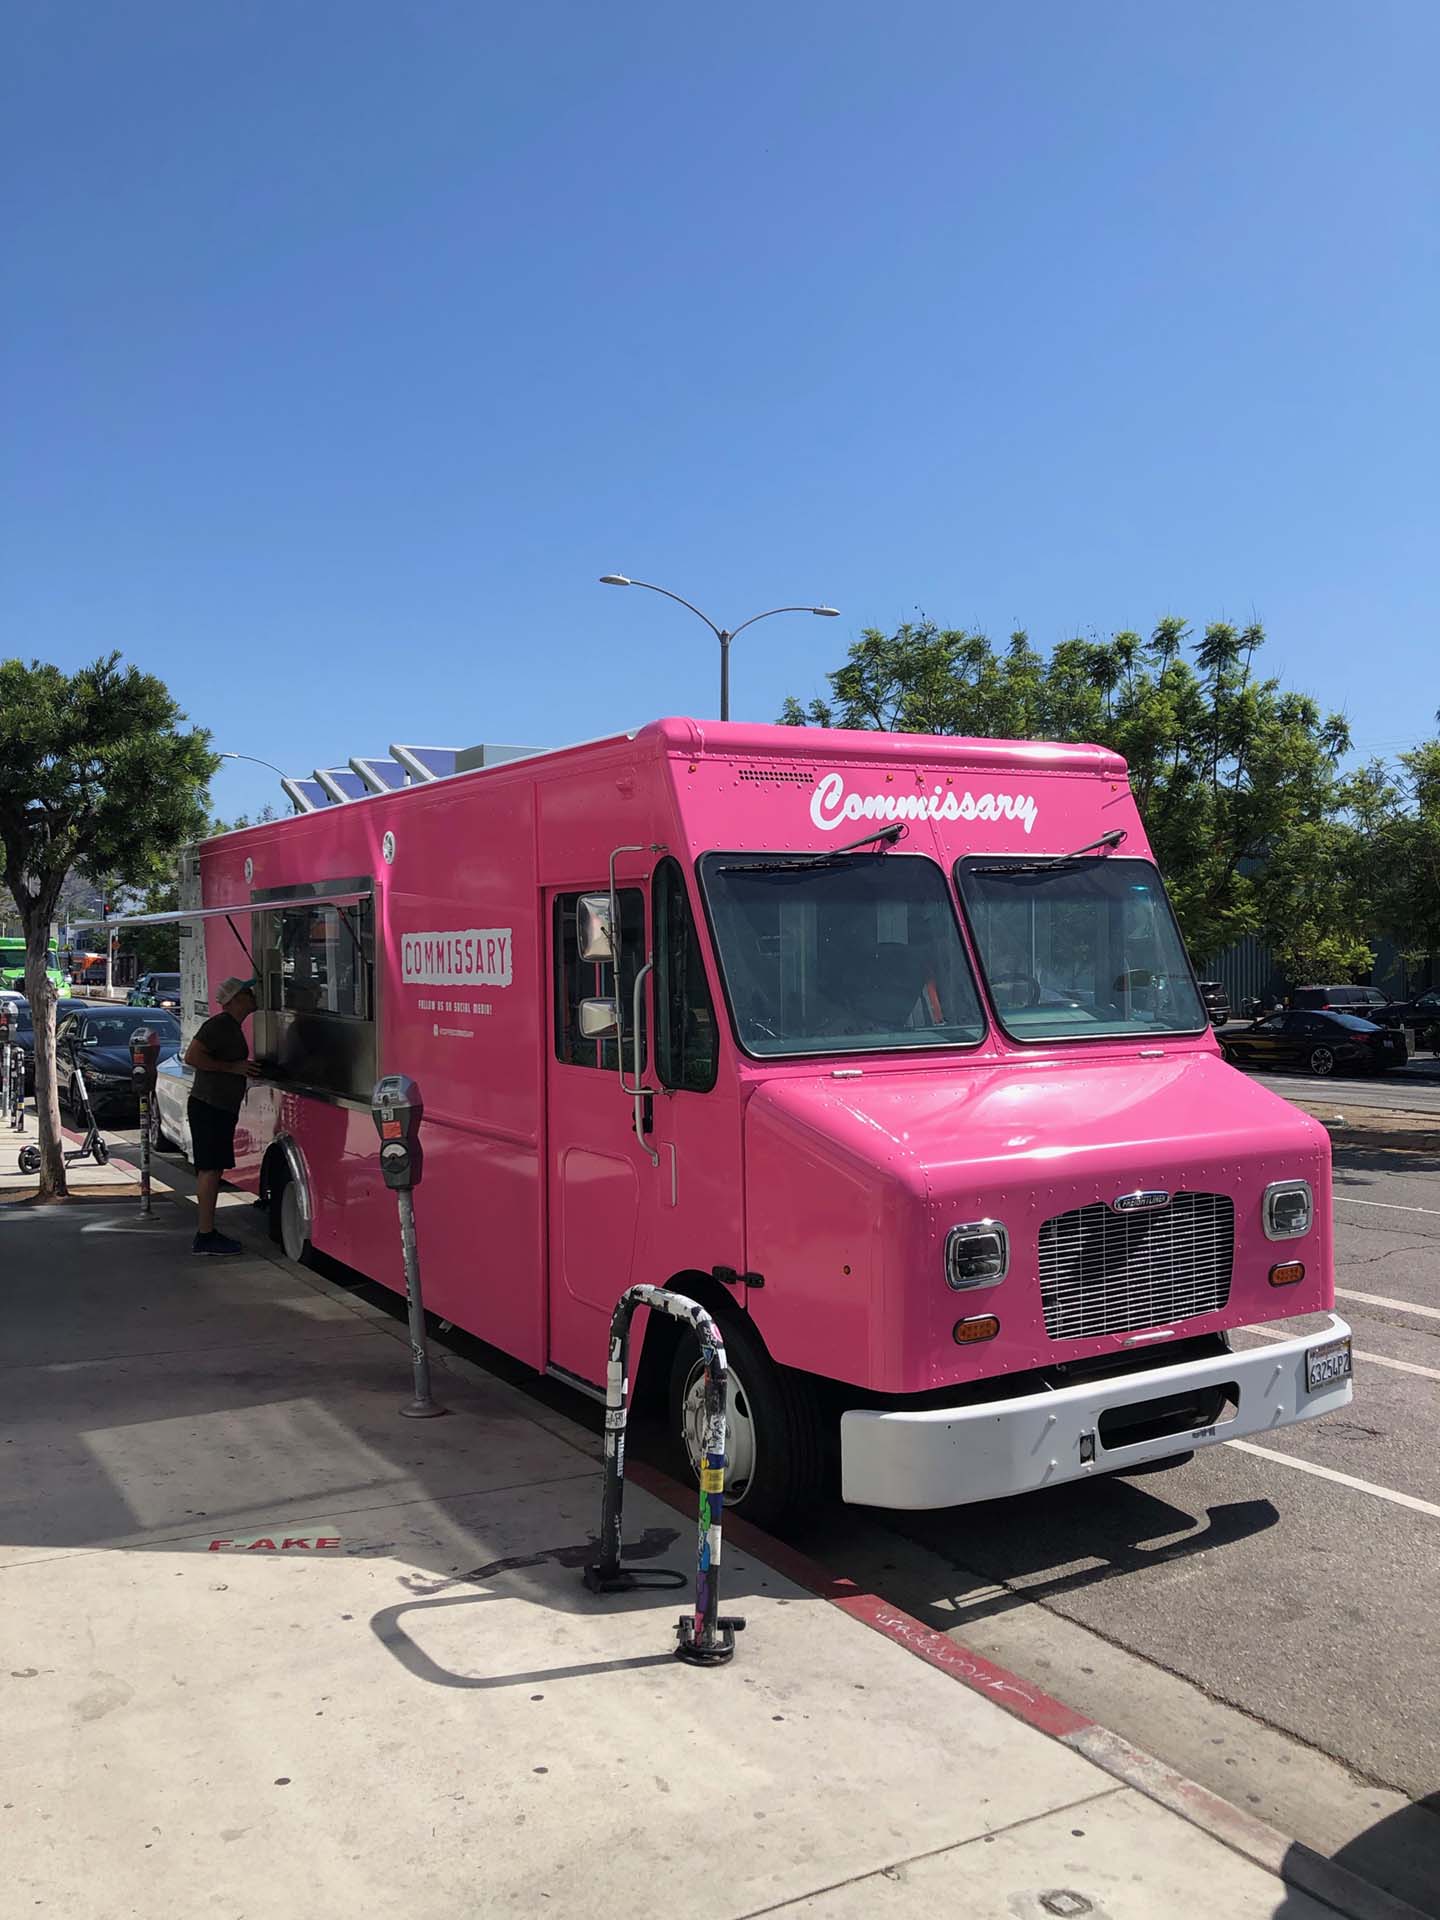 Coffee Commissary food truck